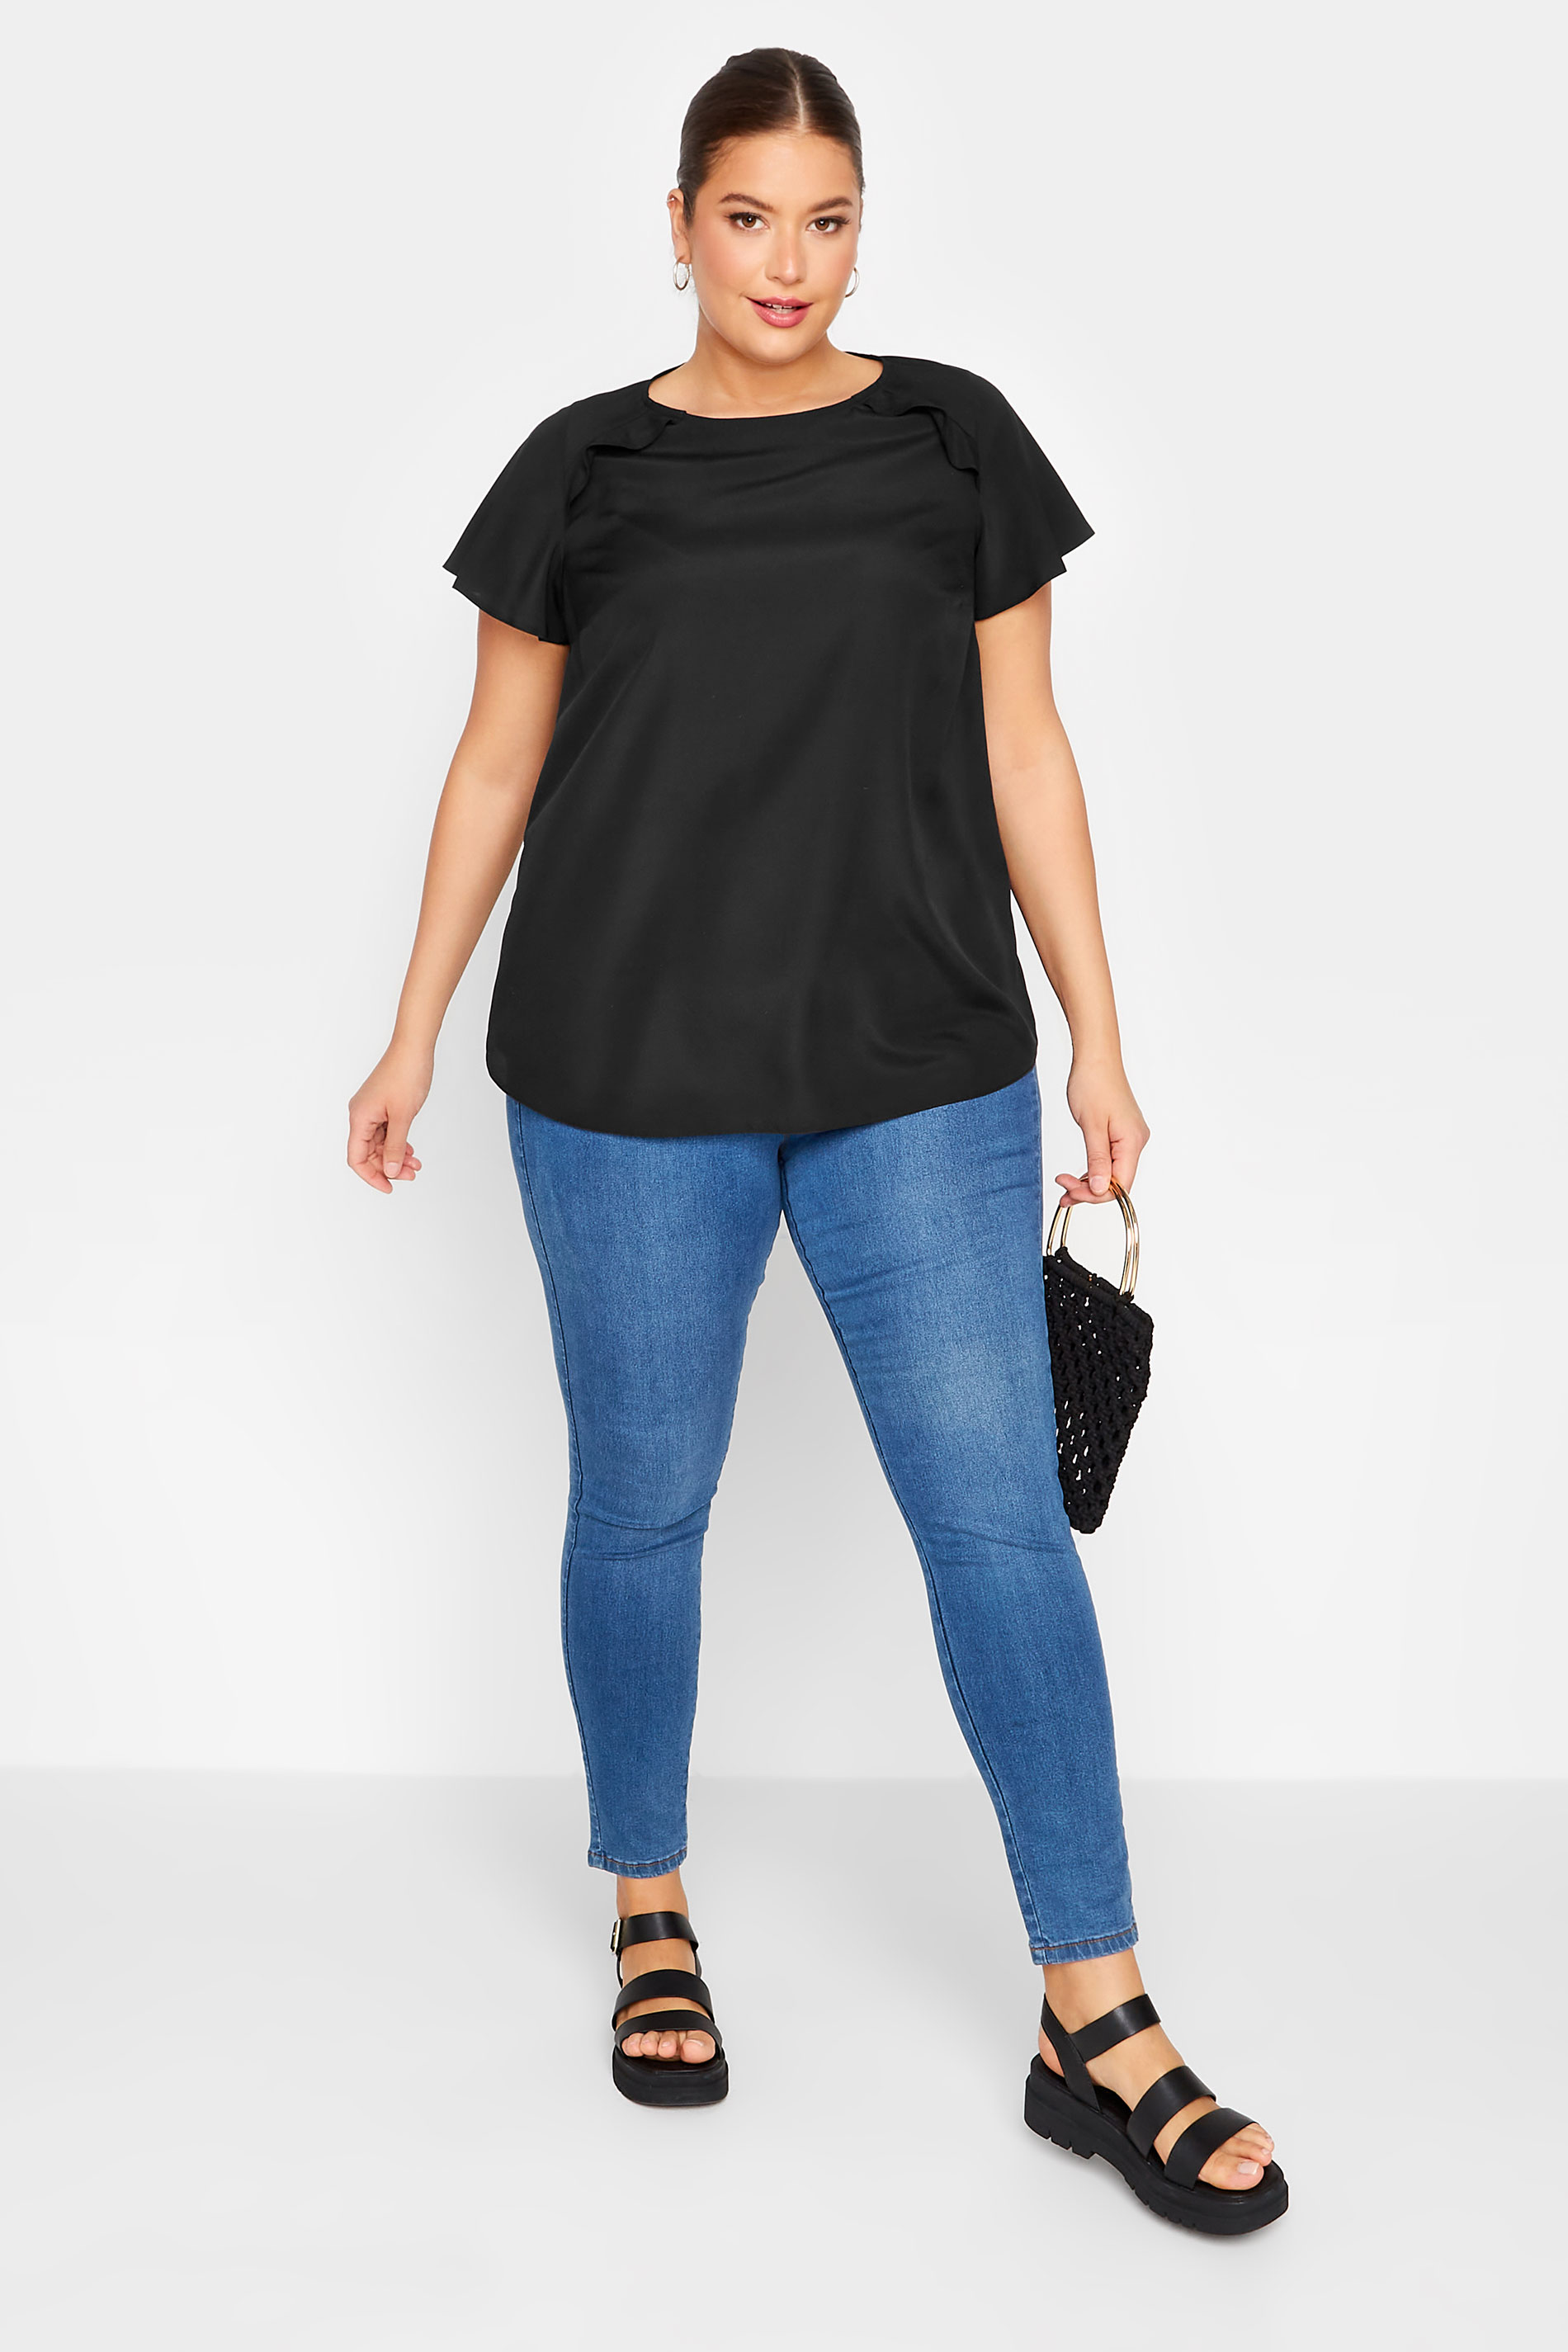 YOURS Plus Size Black Frill Short Sleeve Blouse | Yours Clothing 2